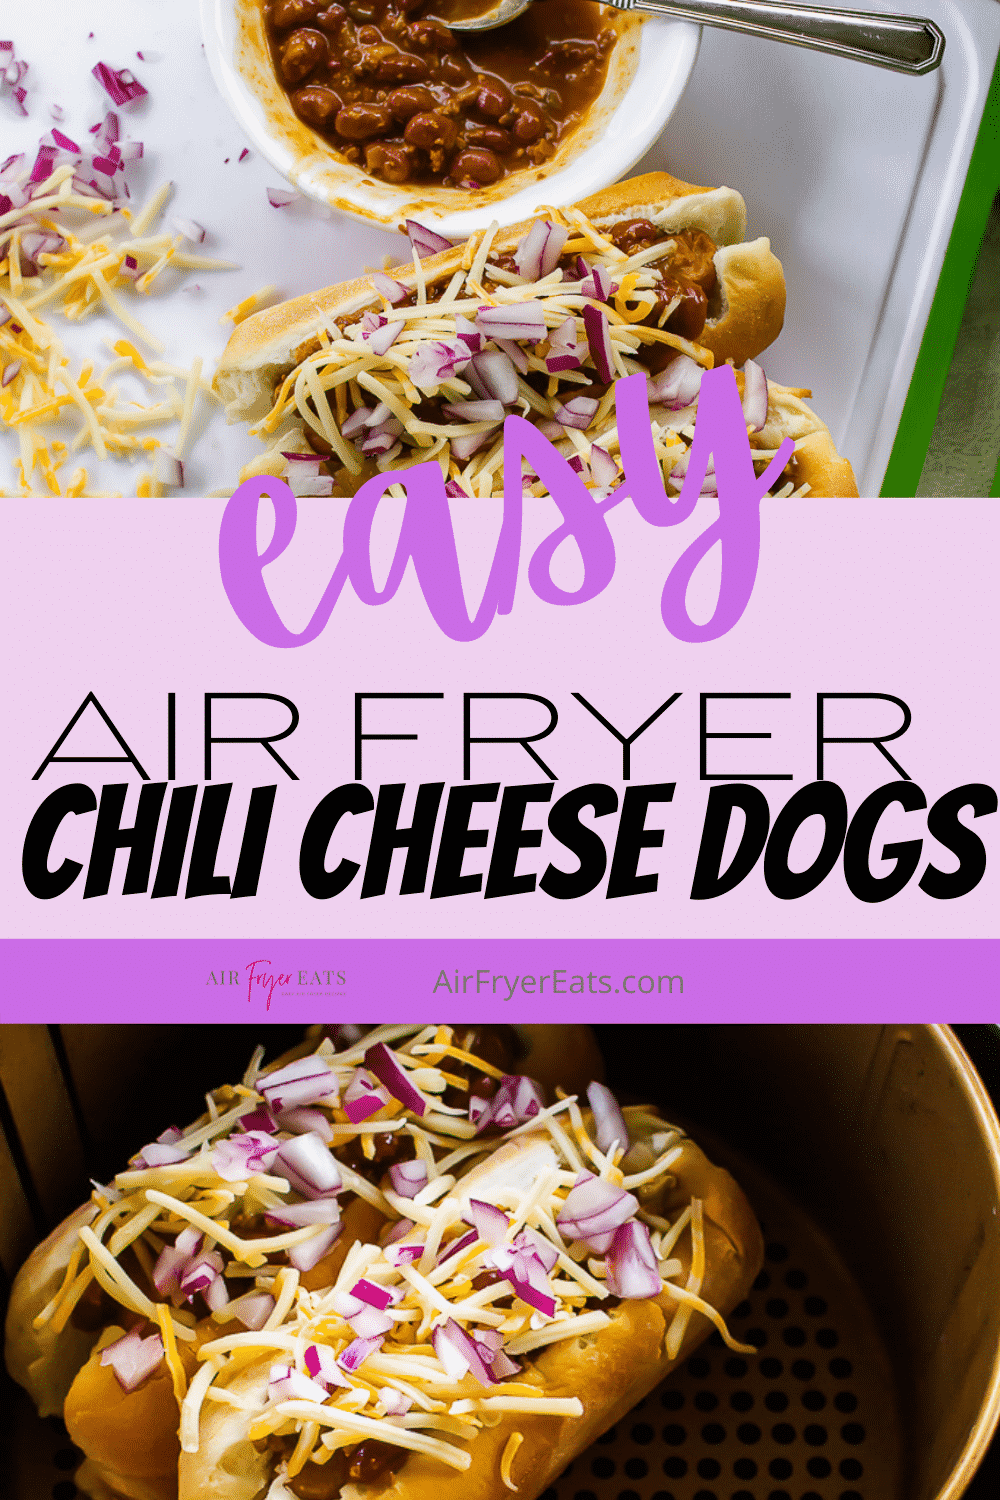 These Air Fryer Chili Cheese Dogs are quick to make, easy to assemble, and perfect for feeding a crowd! You'll dream of ballpark days with these chili dogs. #partyfood #chilicheesedogs #airfryerchilidogs via @vegetarianmamma